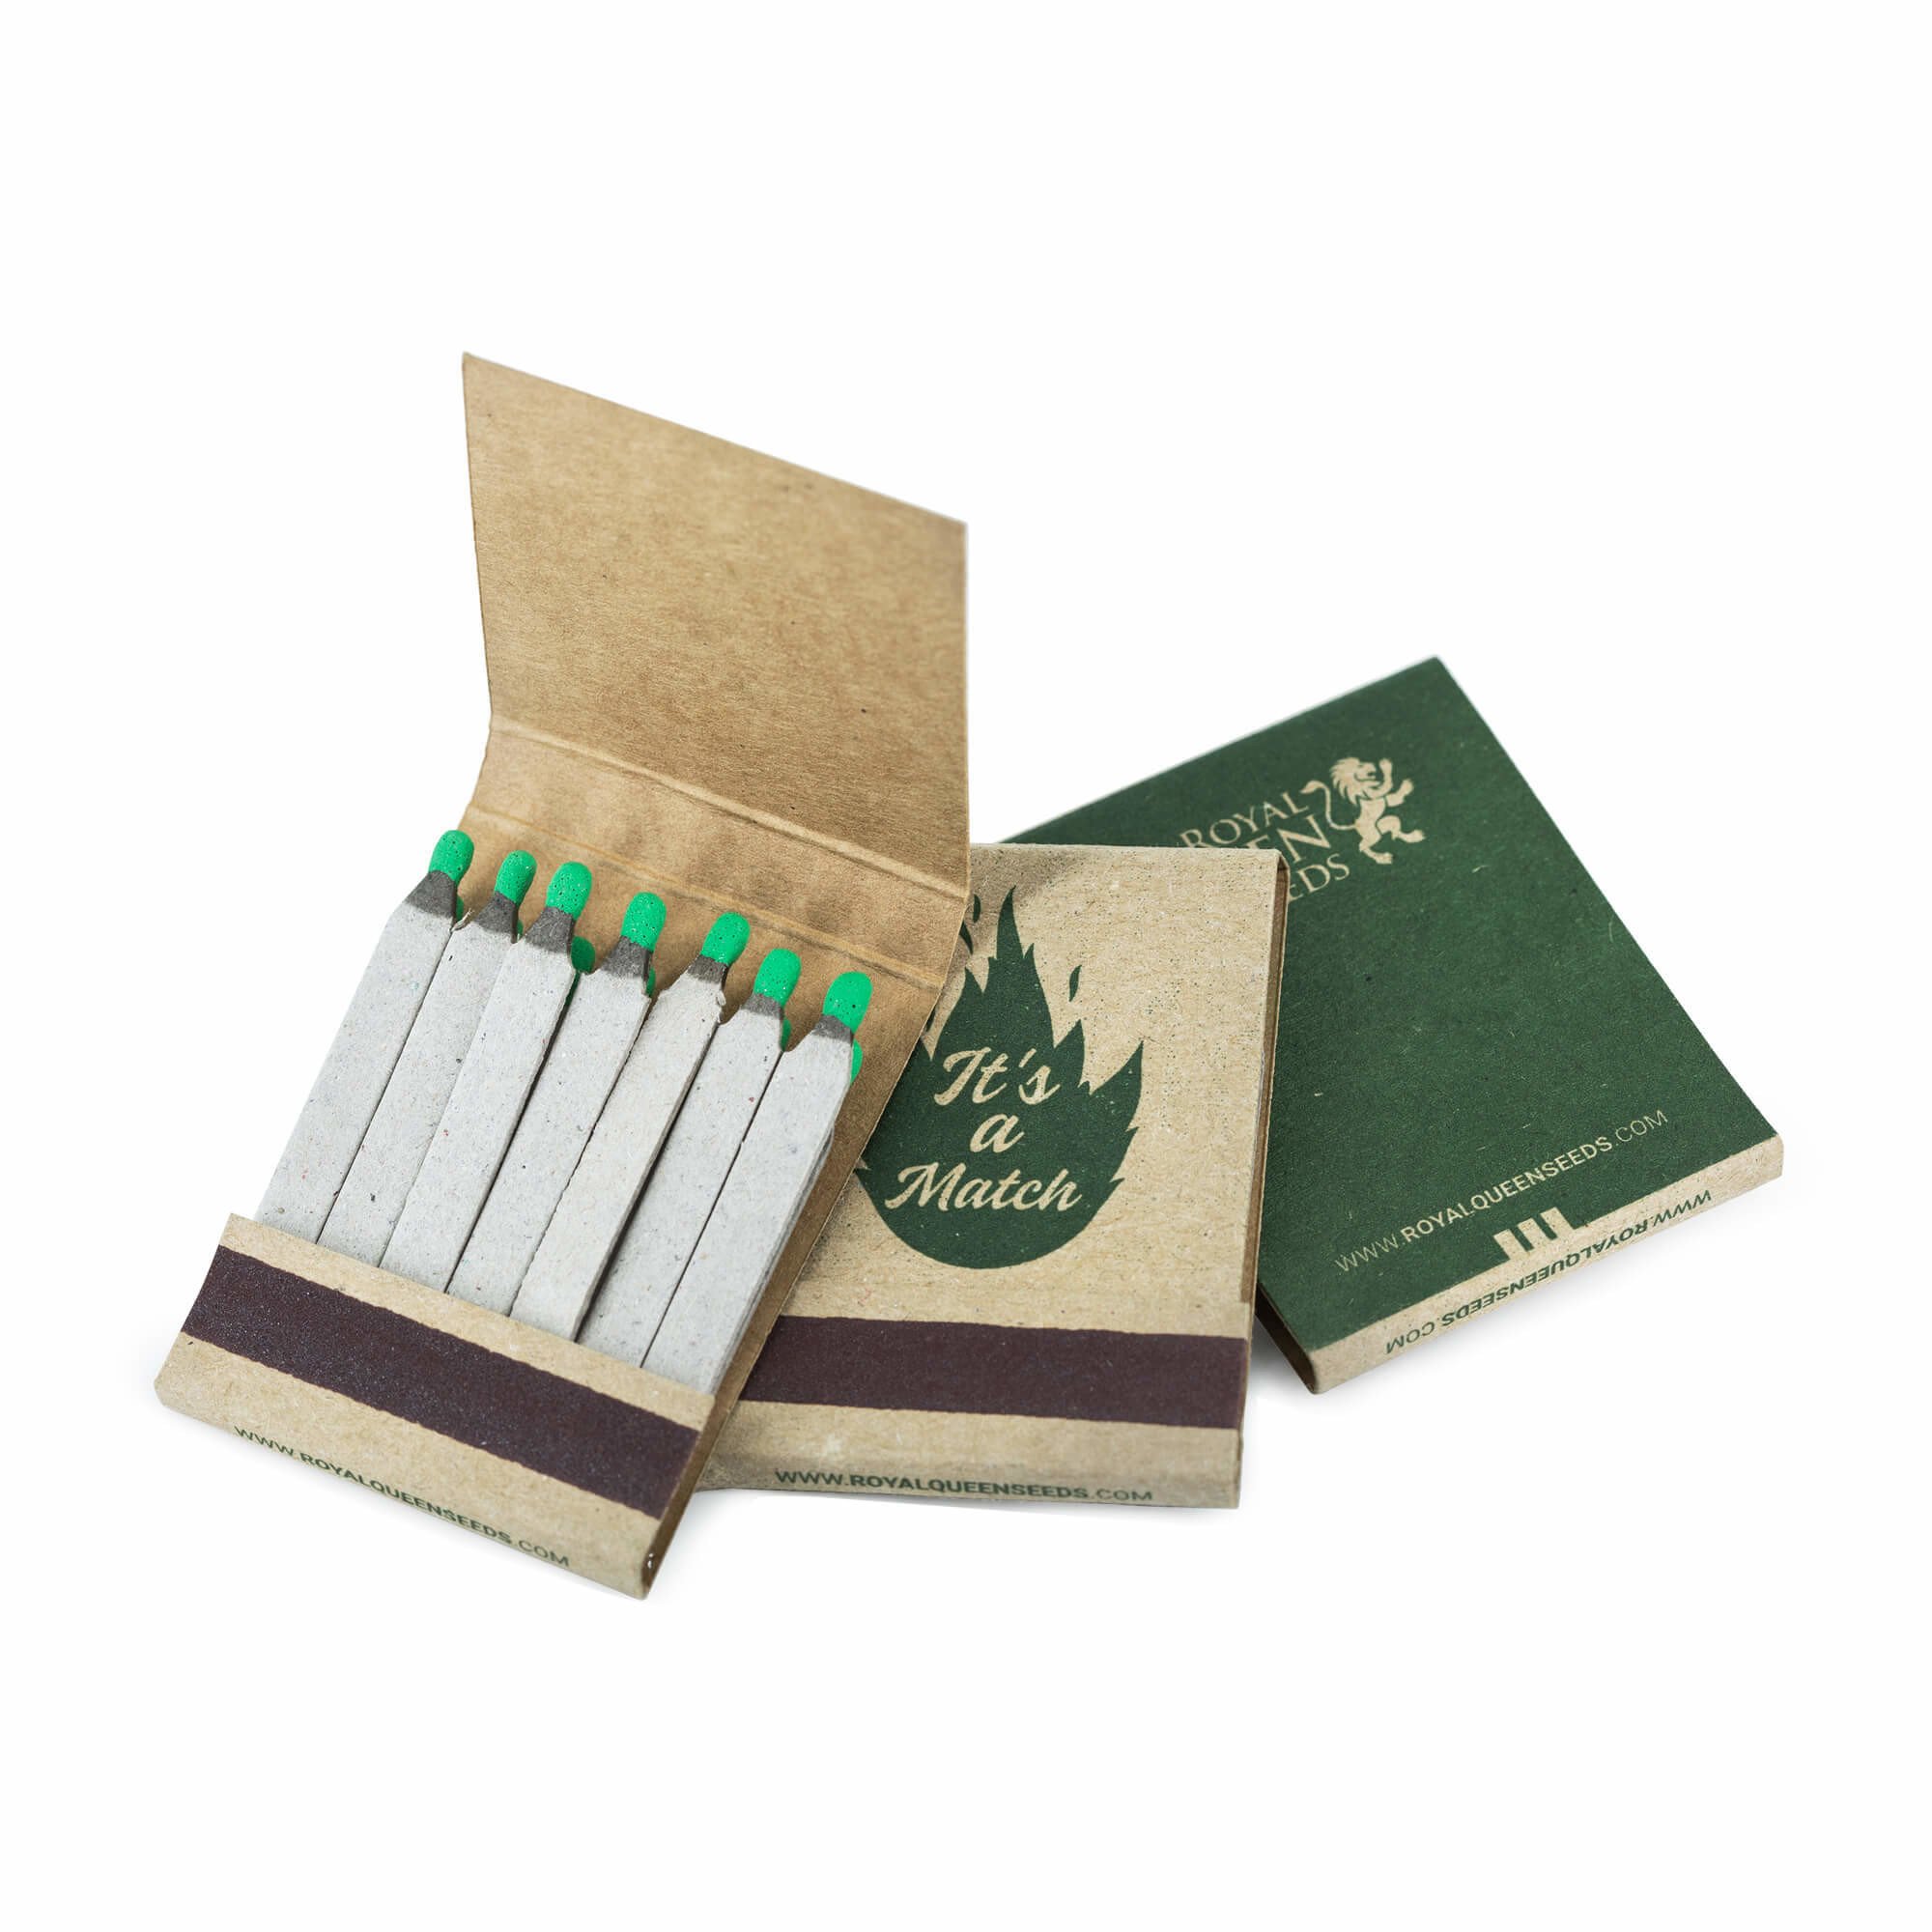 Eco Match Box - Royal Queen Seeds